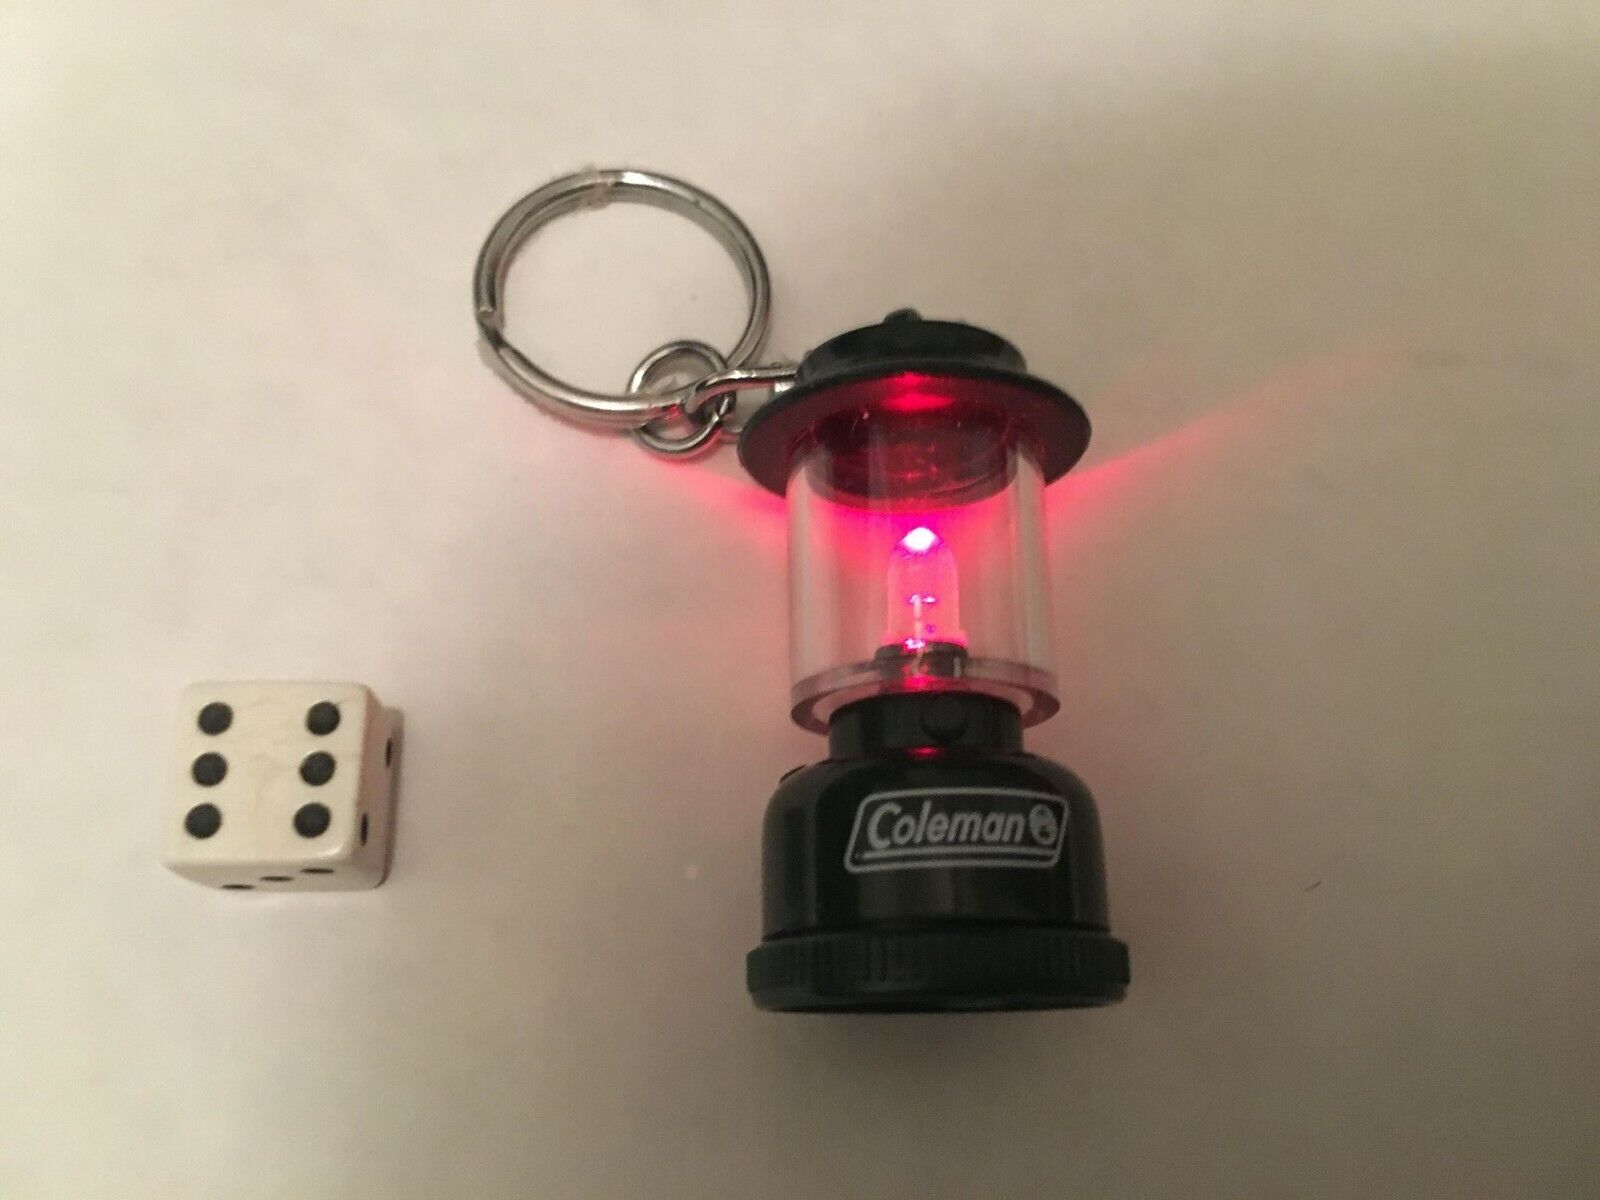 COLEMAN MINI LAMP KEYCHAIN LIGHTS UP WORK AND LOOKS GREAT